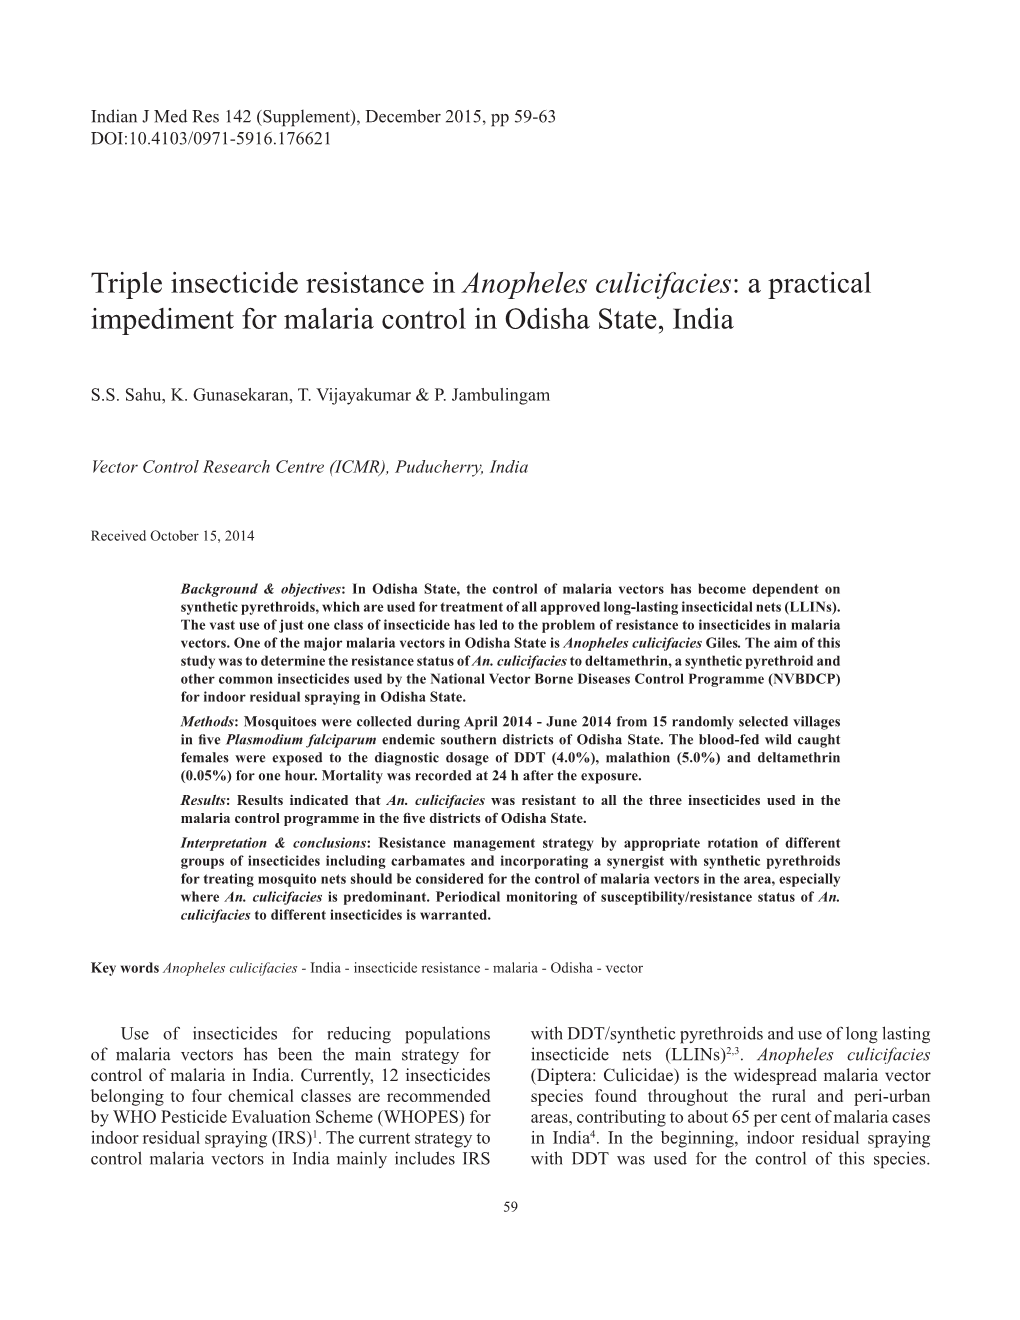 Triple Insecticide Resistance in Anopheles Culicifacies: a Practical Impediment for Malaria Control in Odisha State, India